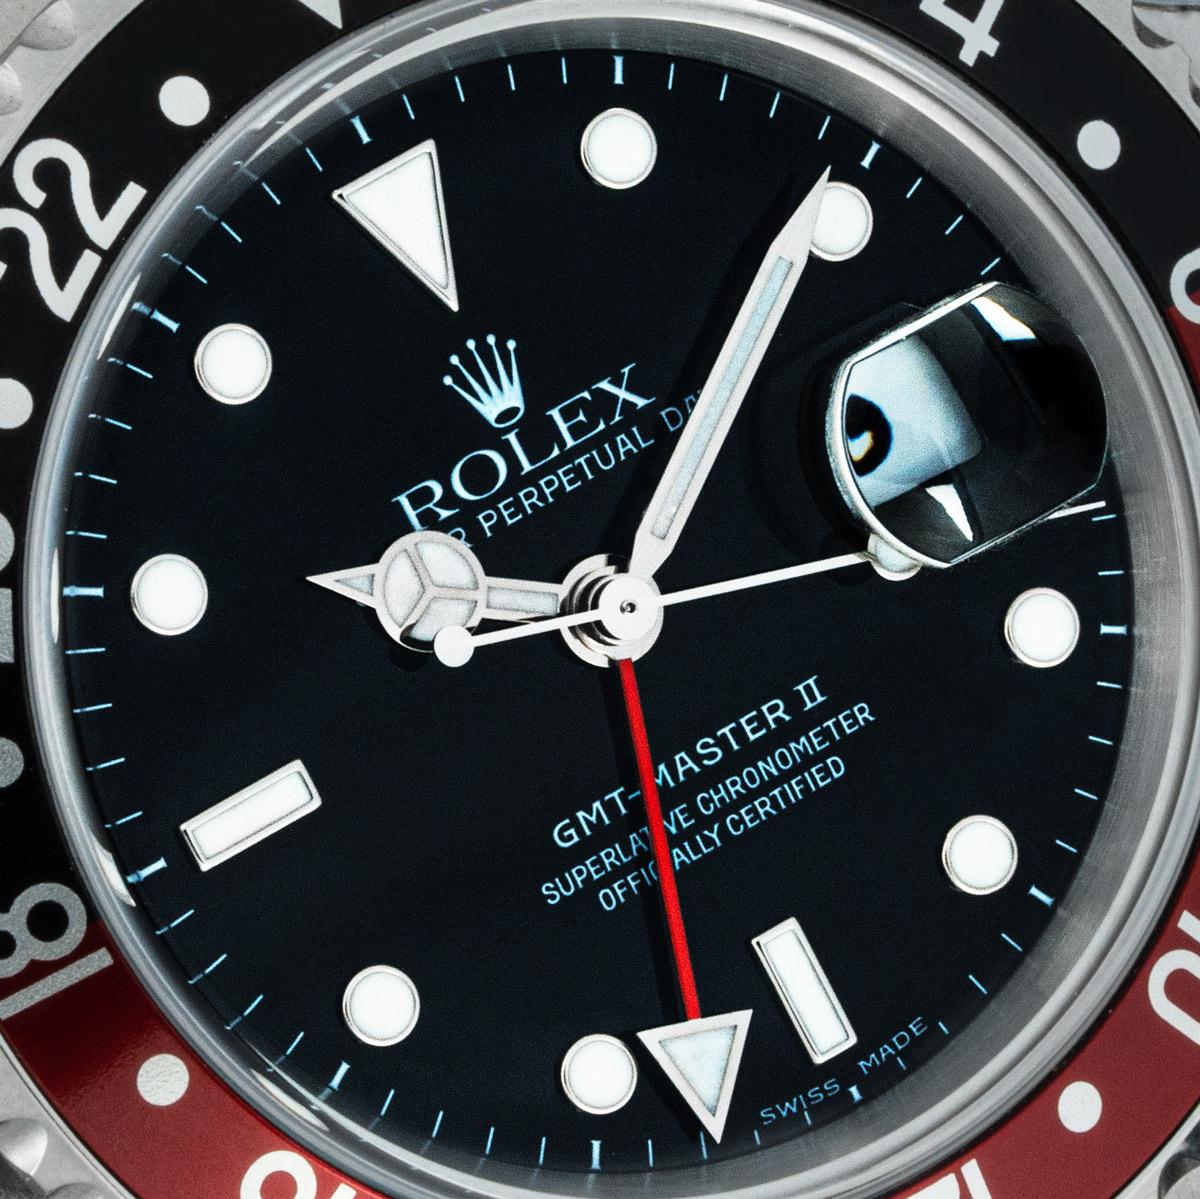 A NOS stainless steel GMT-Master II by Rolex. Features a black dial with a date aperture and a red second-time zone hand. The bidirectional rotatable bezel features a 24-hour display and a red and black 